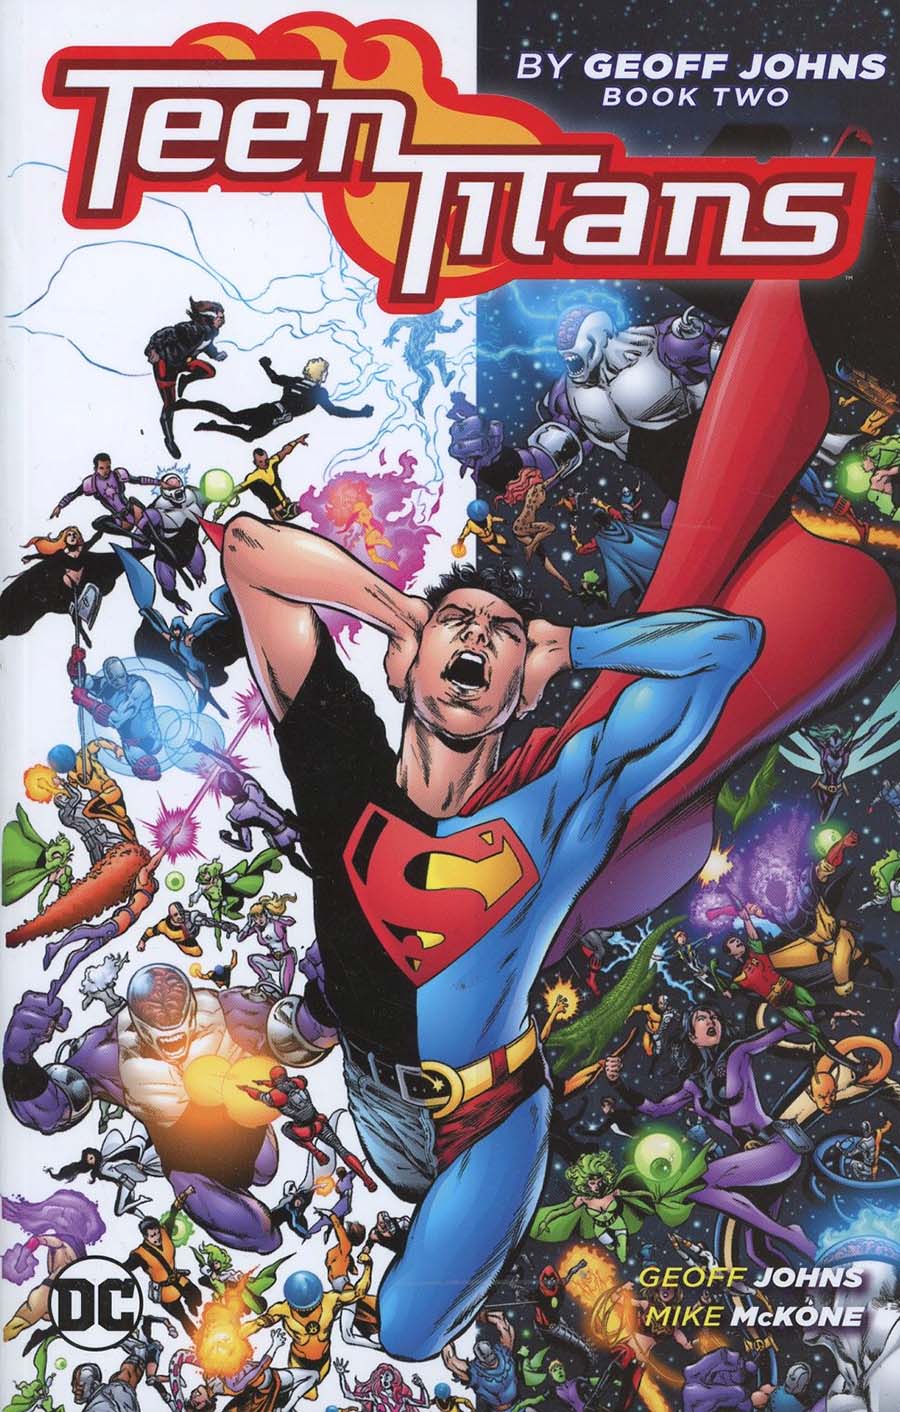 Teen Titans By Geoff Johns Book 2 TP